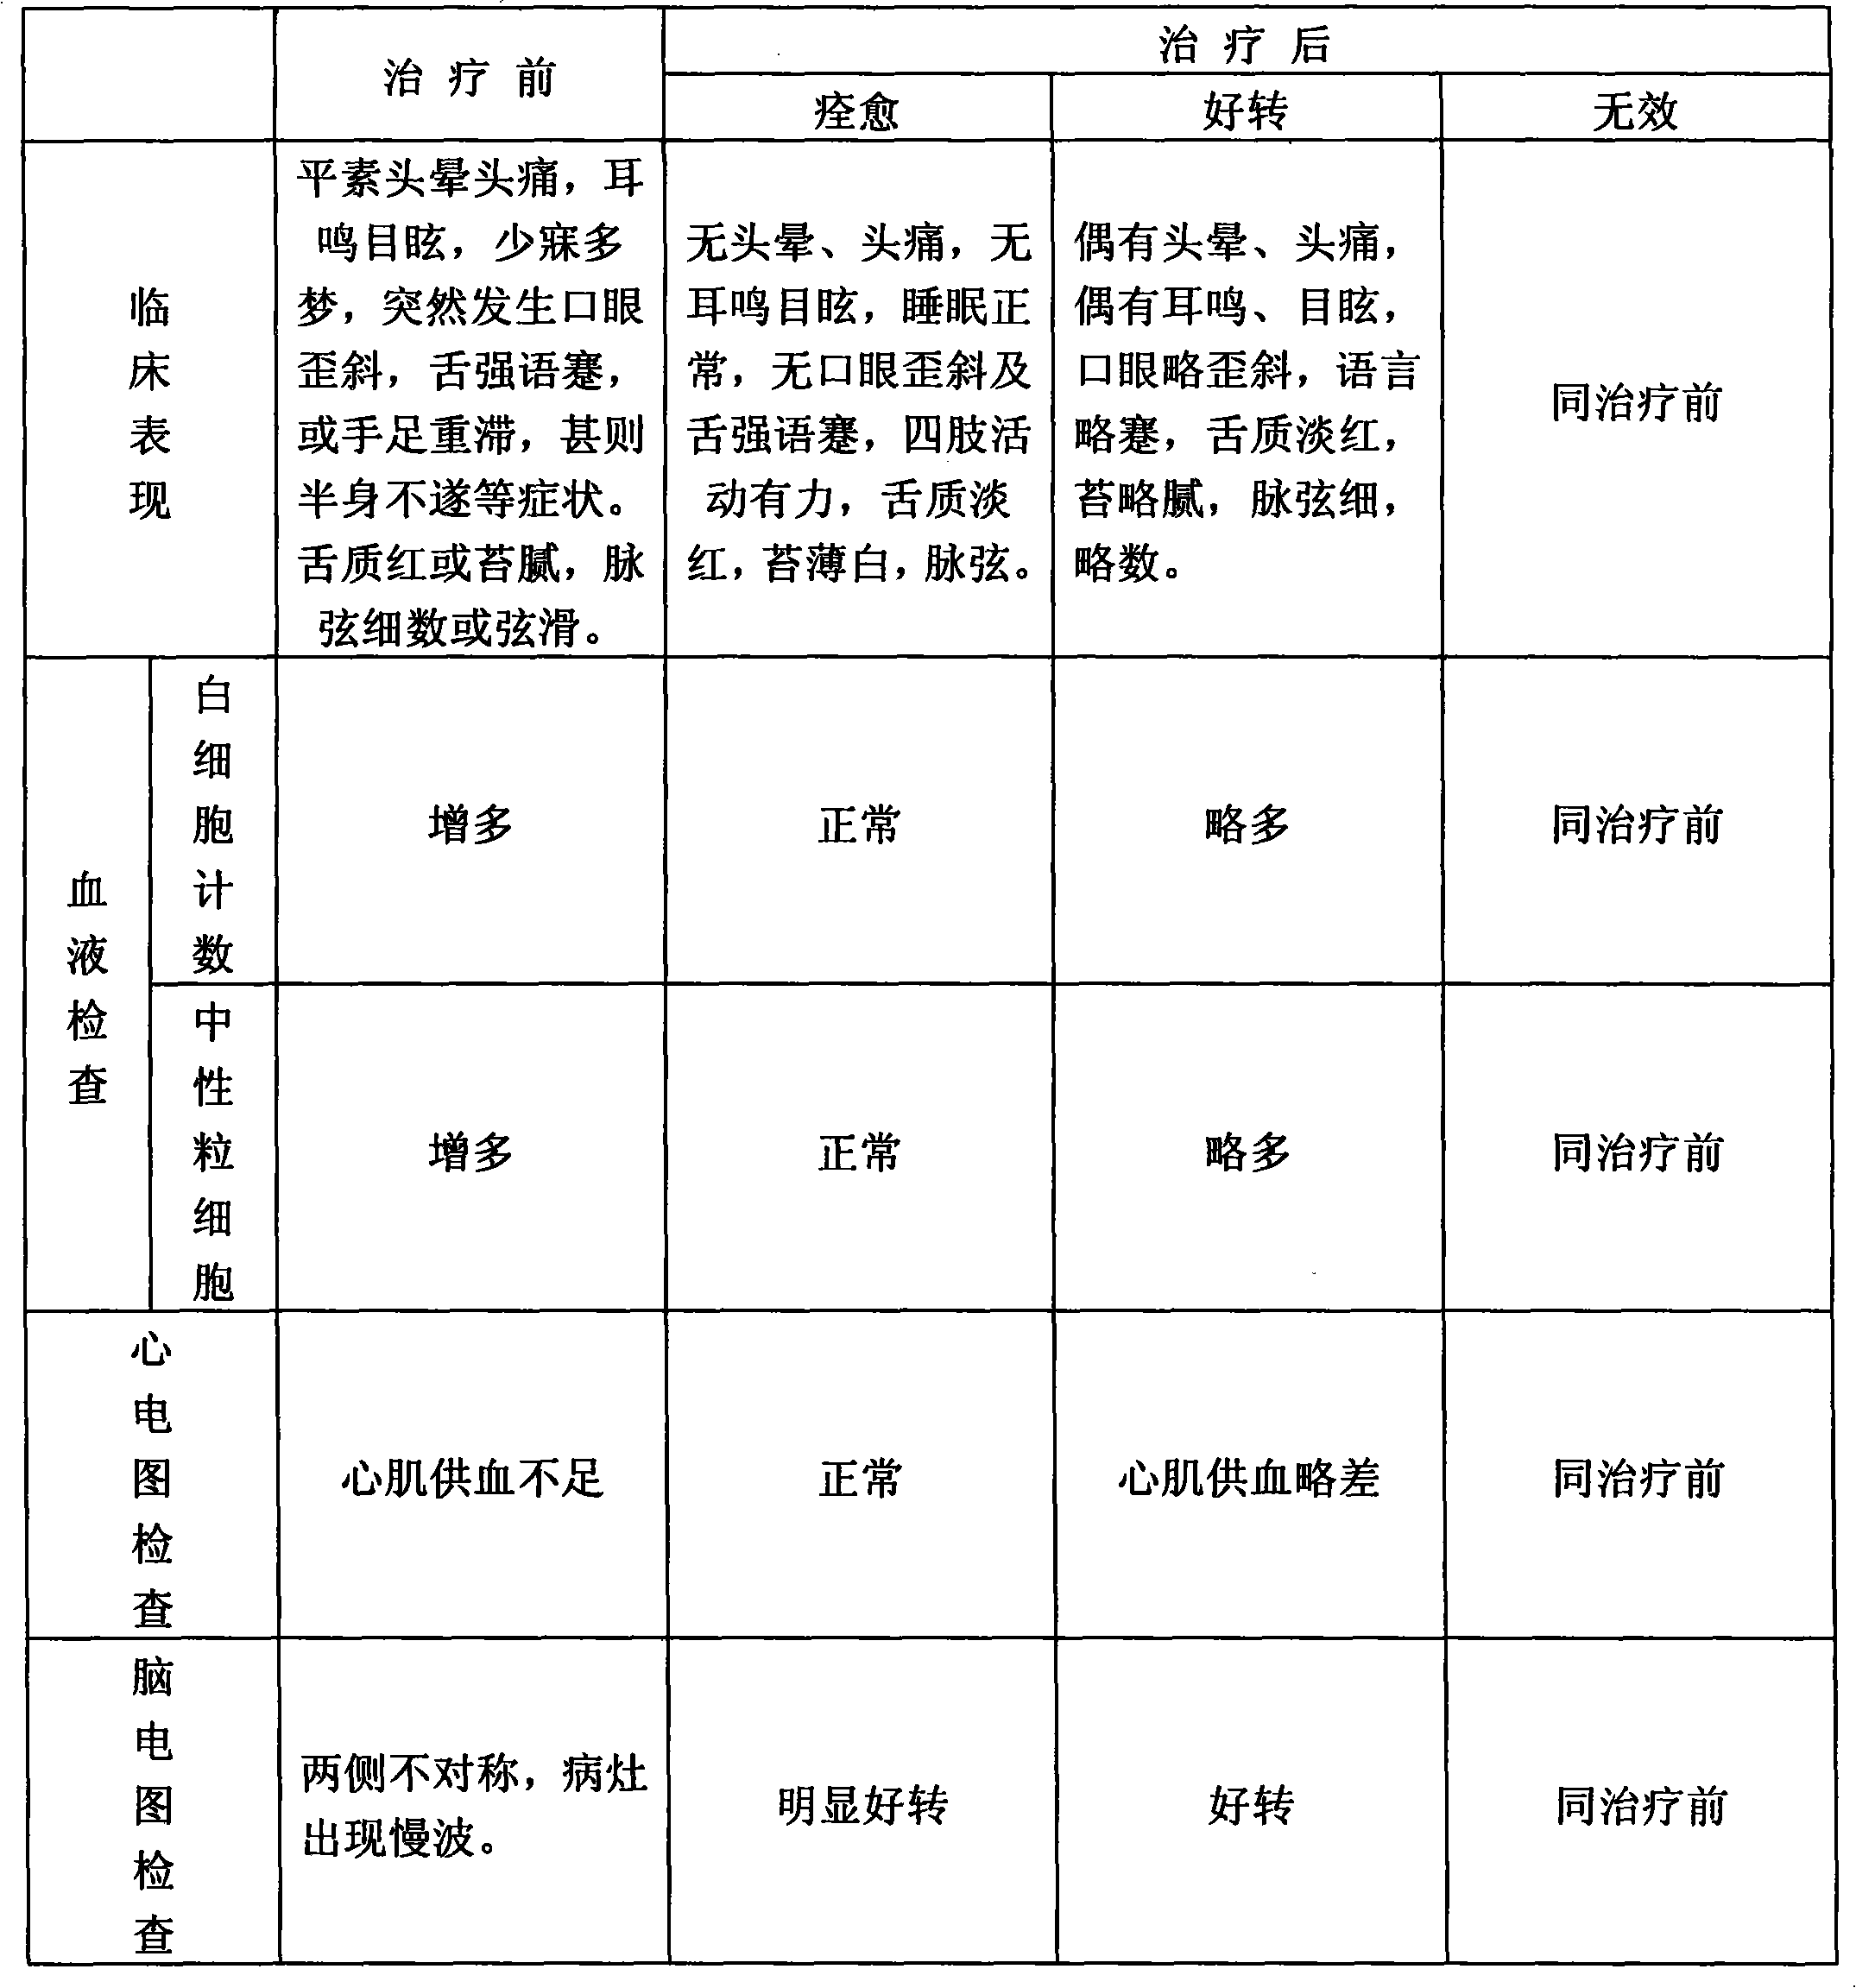 Method for preparing traditional Chinese medicine for treating stroke with liver-yin and kidney-yin deficiency wind-yang attacking upwards